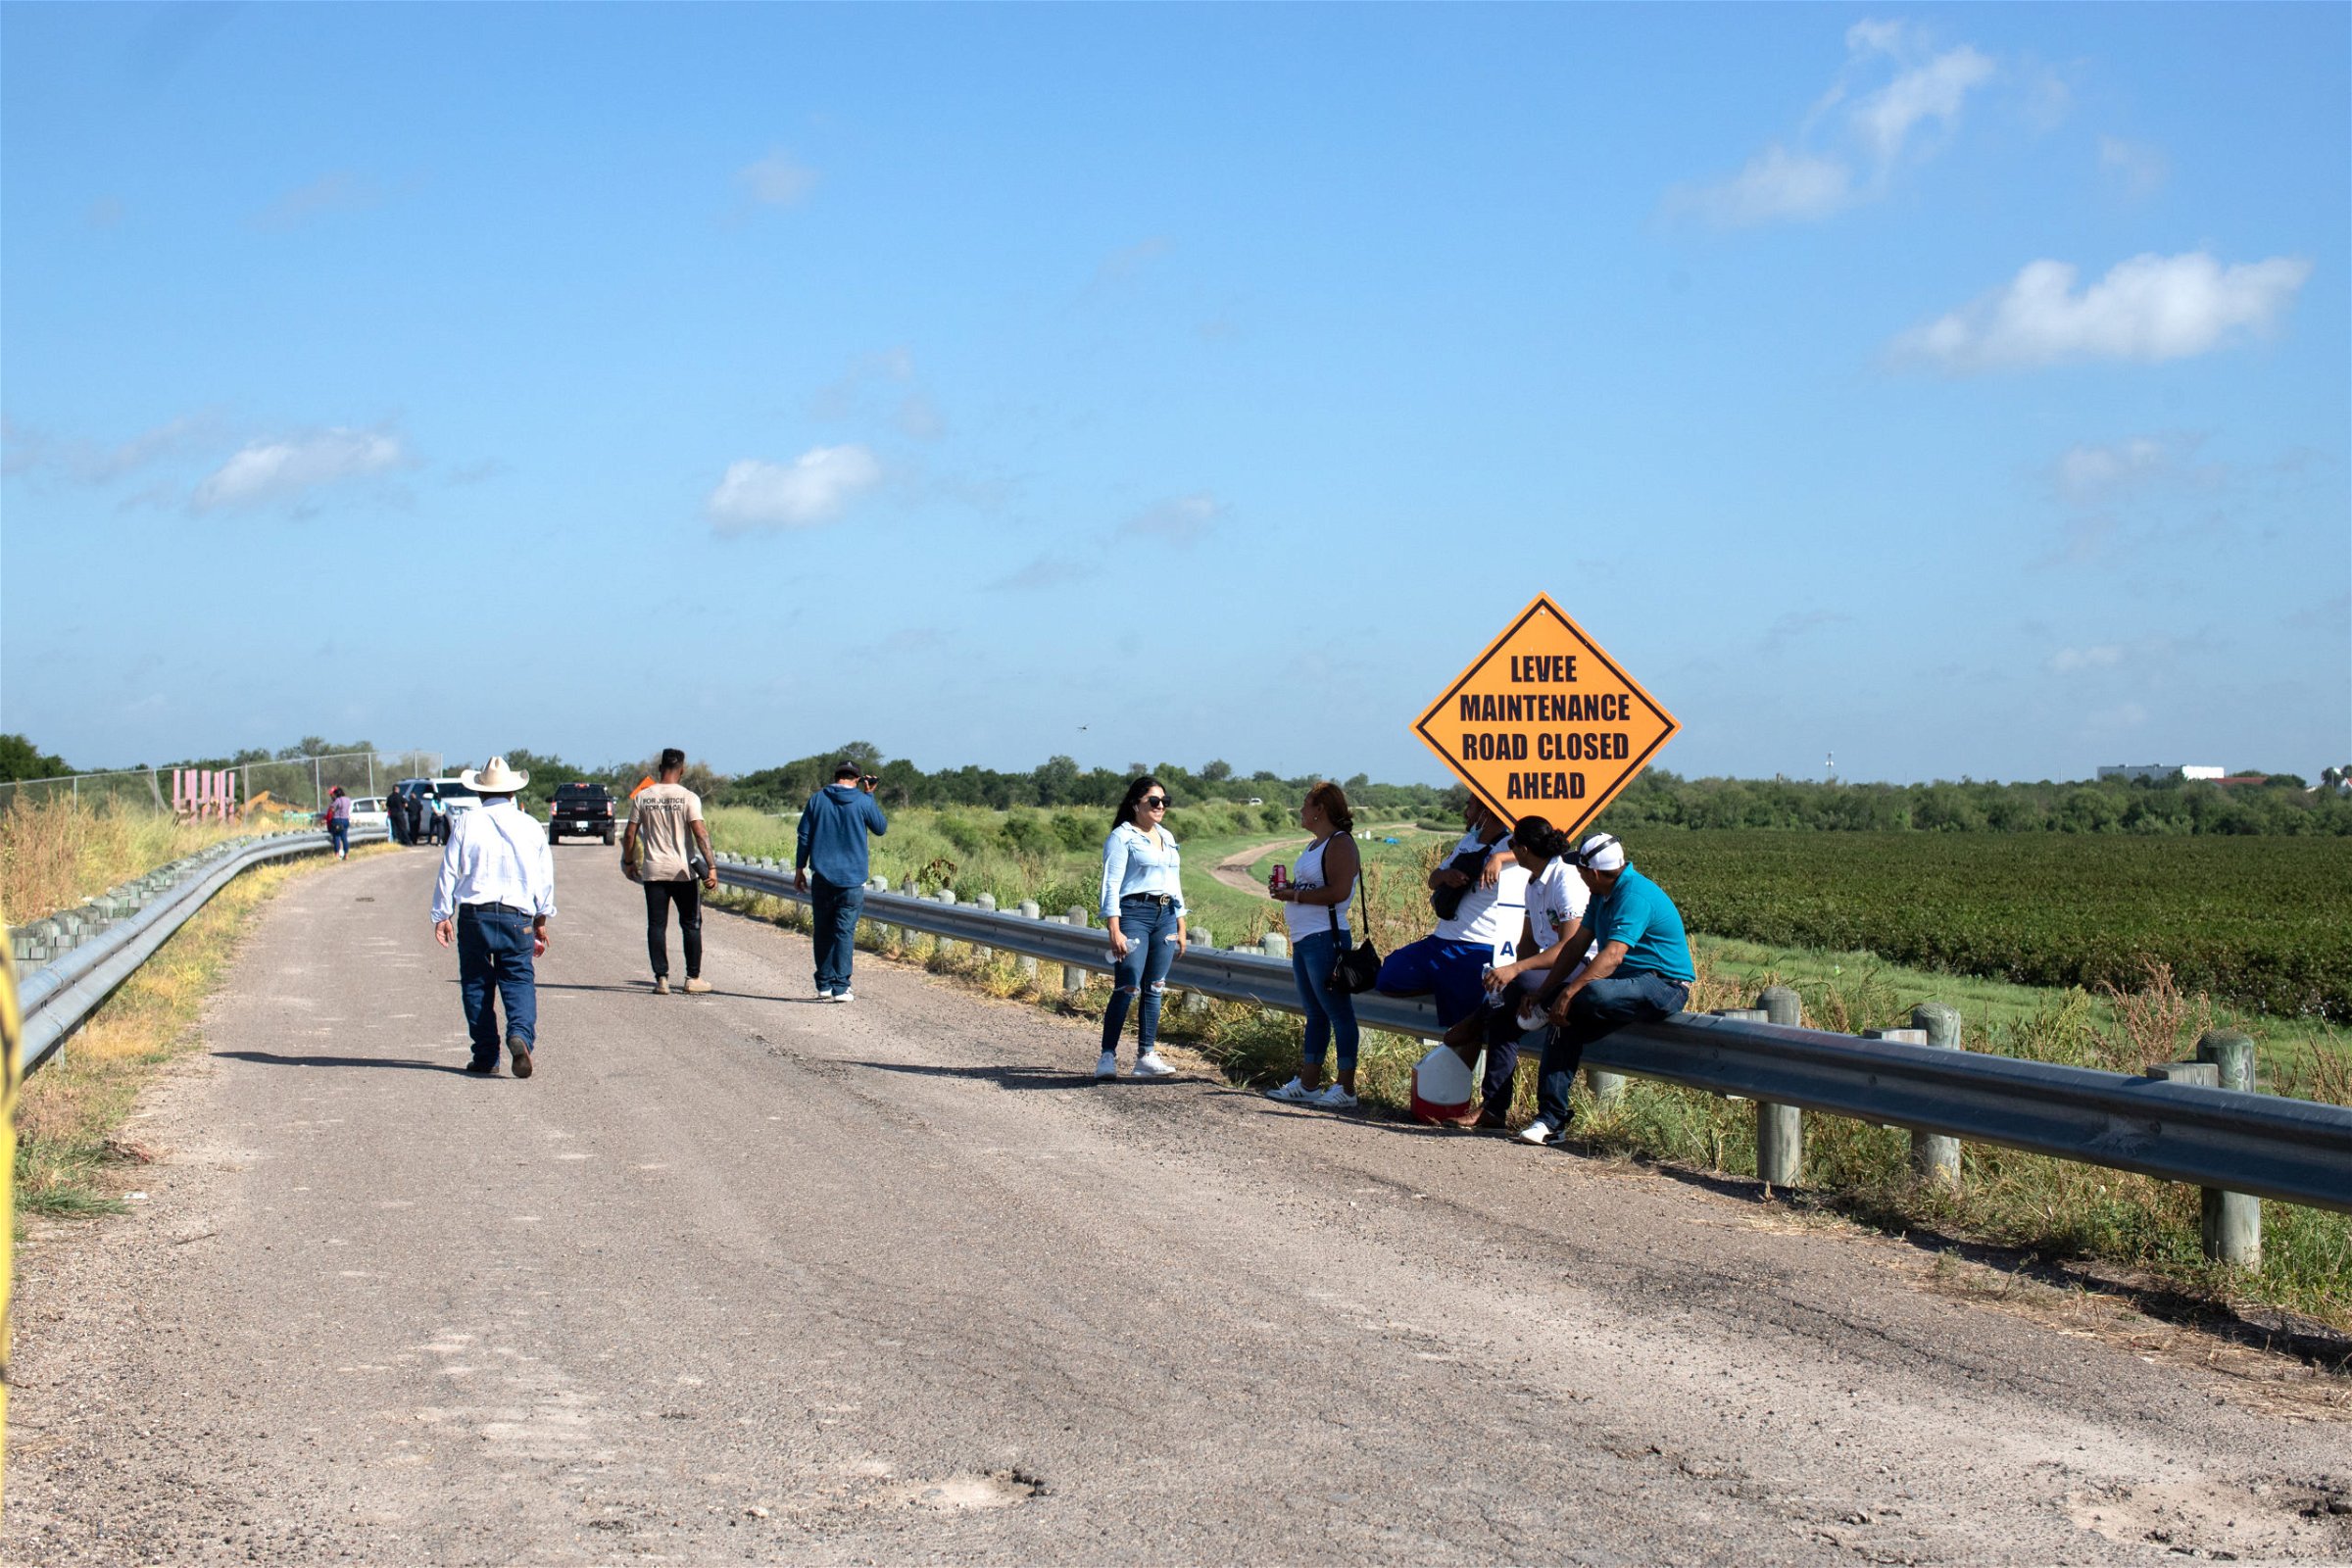 Around two dozen people waited at the endge of Anzalduas Park to pick up friends and family members who tested positive for COVID-19 after entering the U.S. illegally in Mission, Texas, on August 8, 2021. (Kaylee Greenlee - Daily Caller News Foundation)